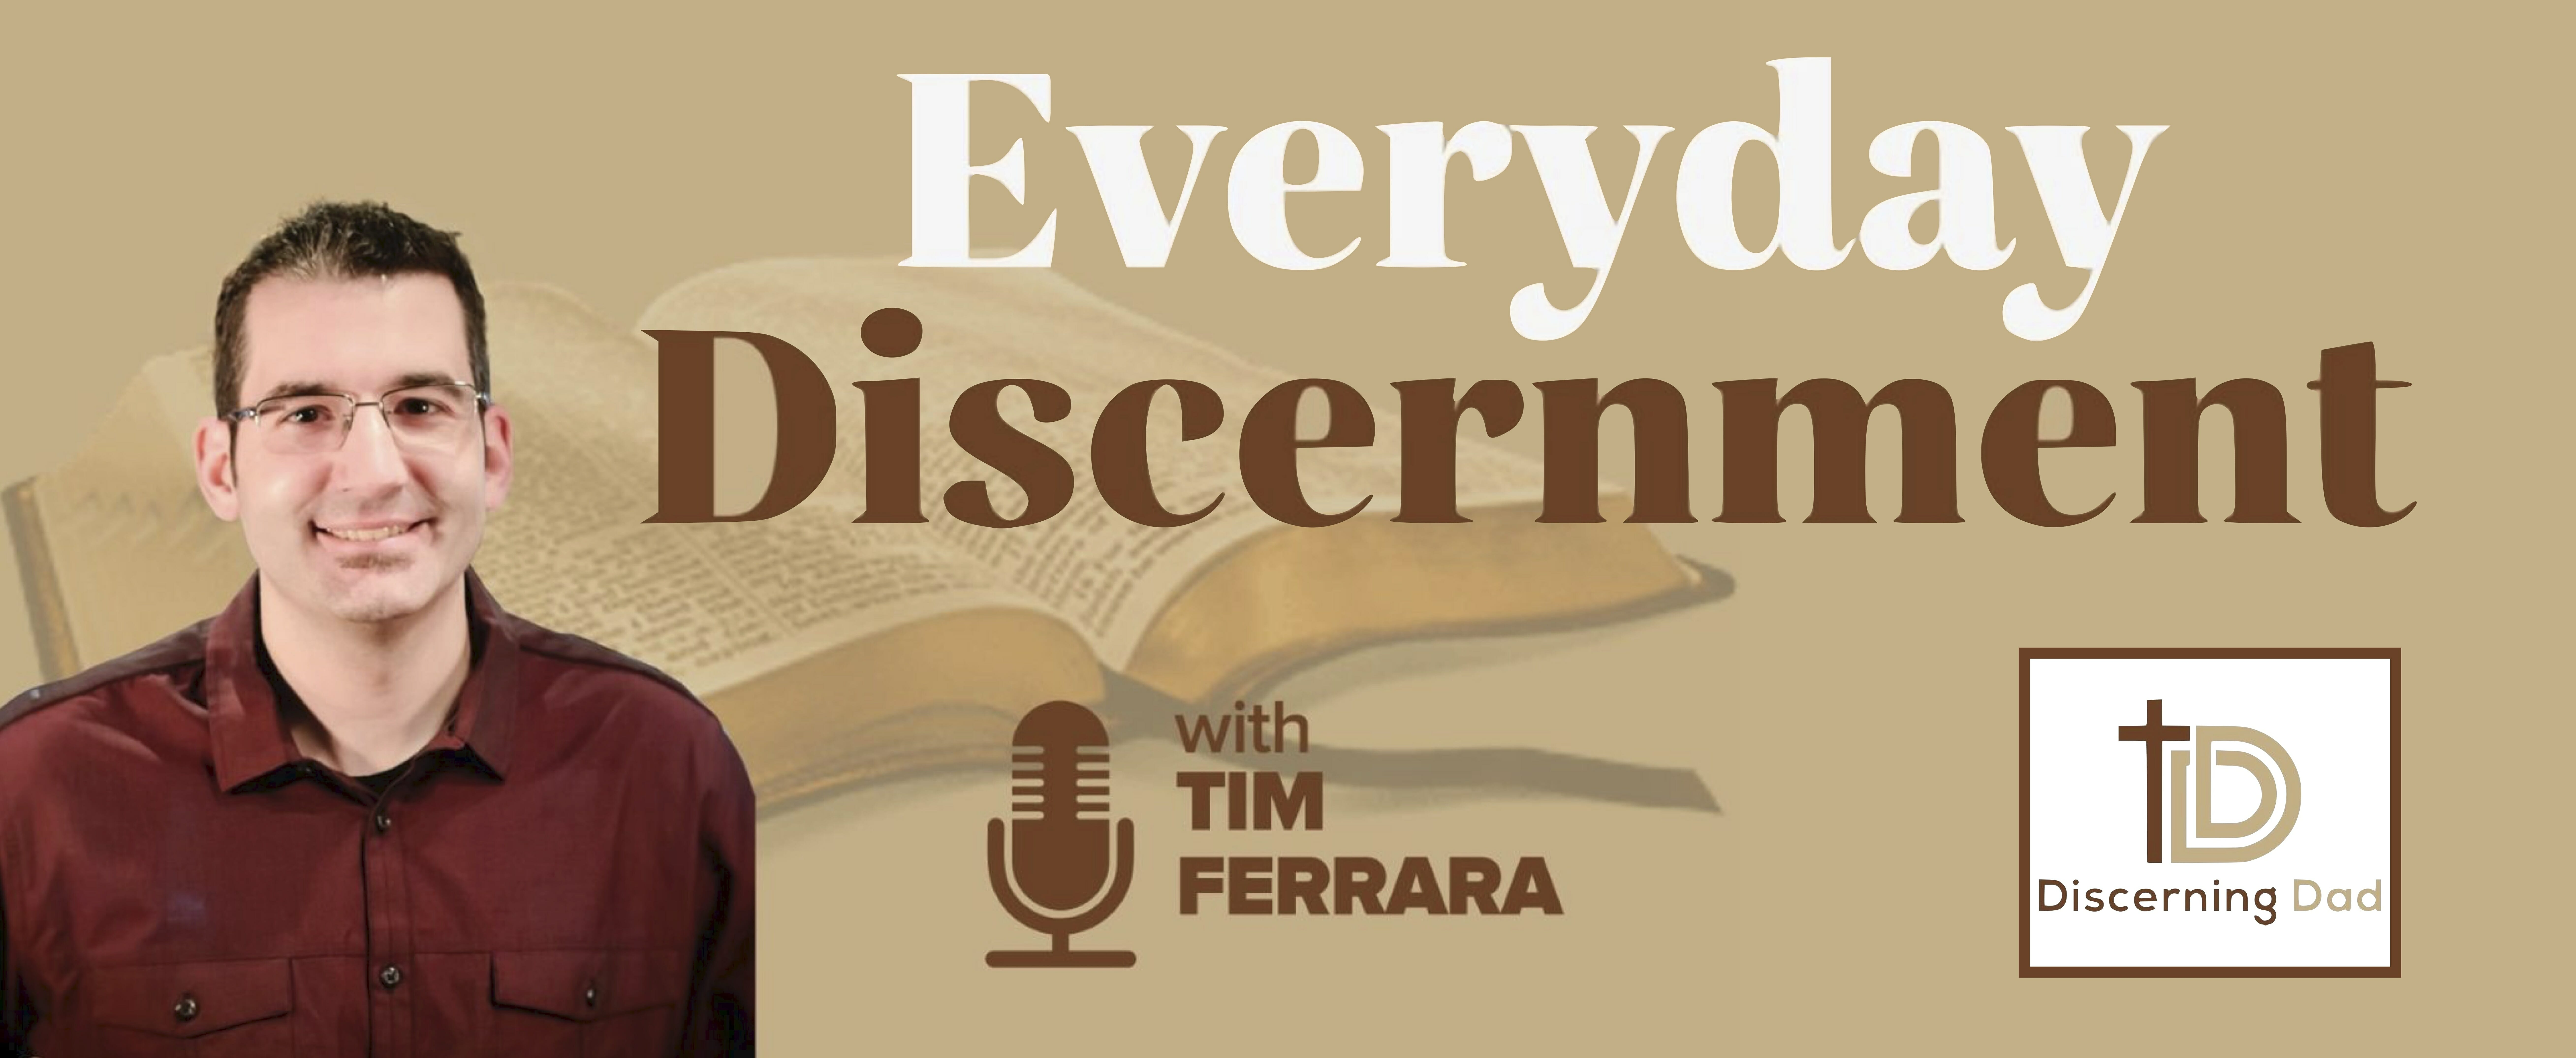 EVERYDAY DISCERNMENT PODCAST: New Focus for Season 3 and First Two Guests Revealed!